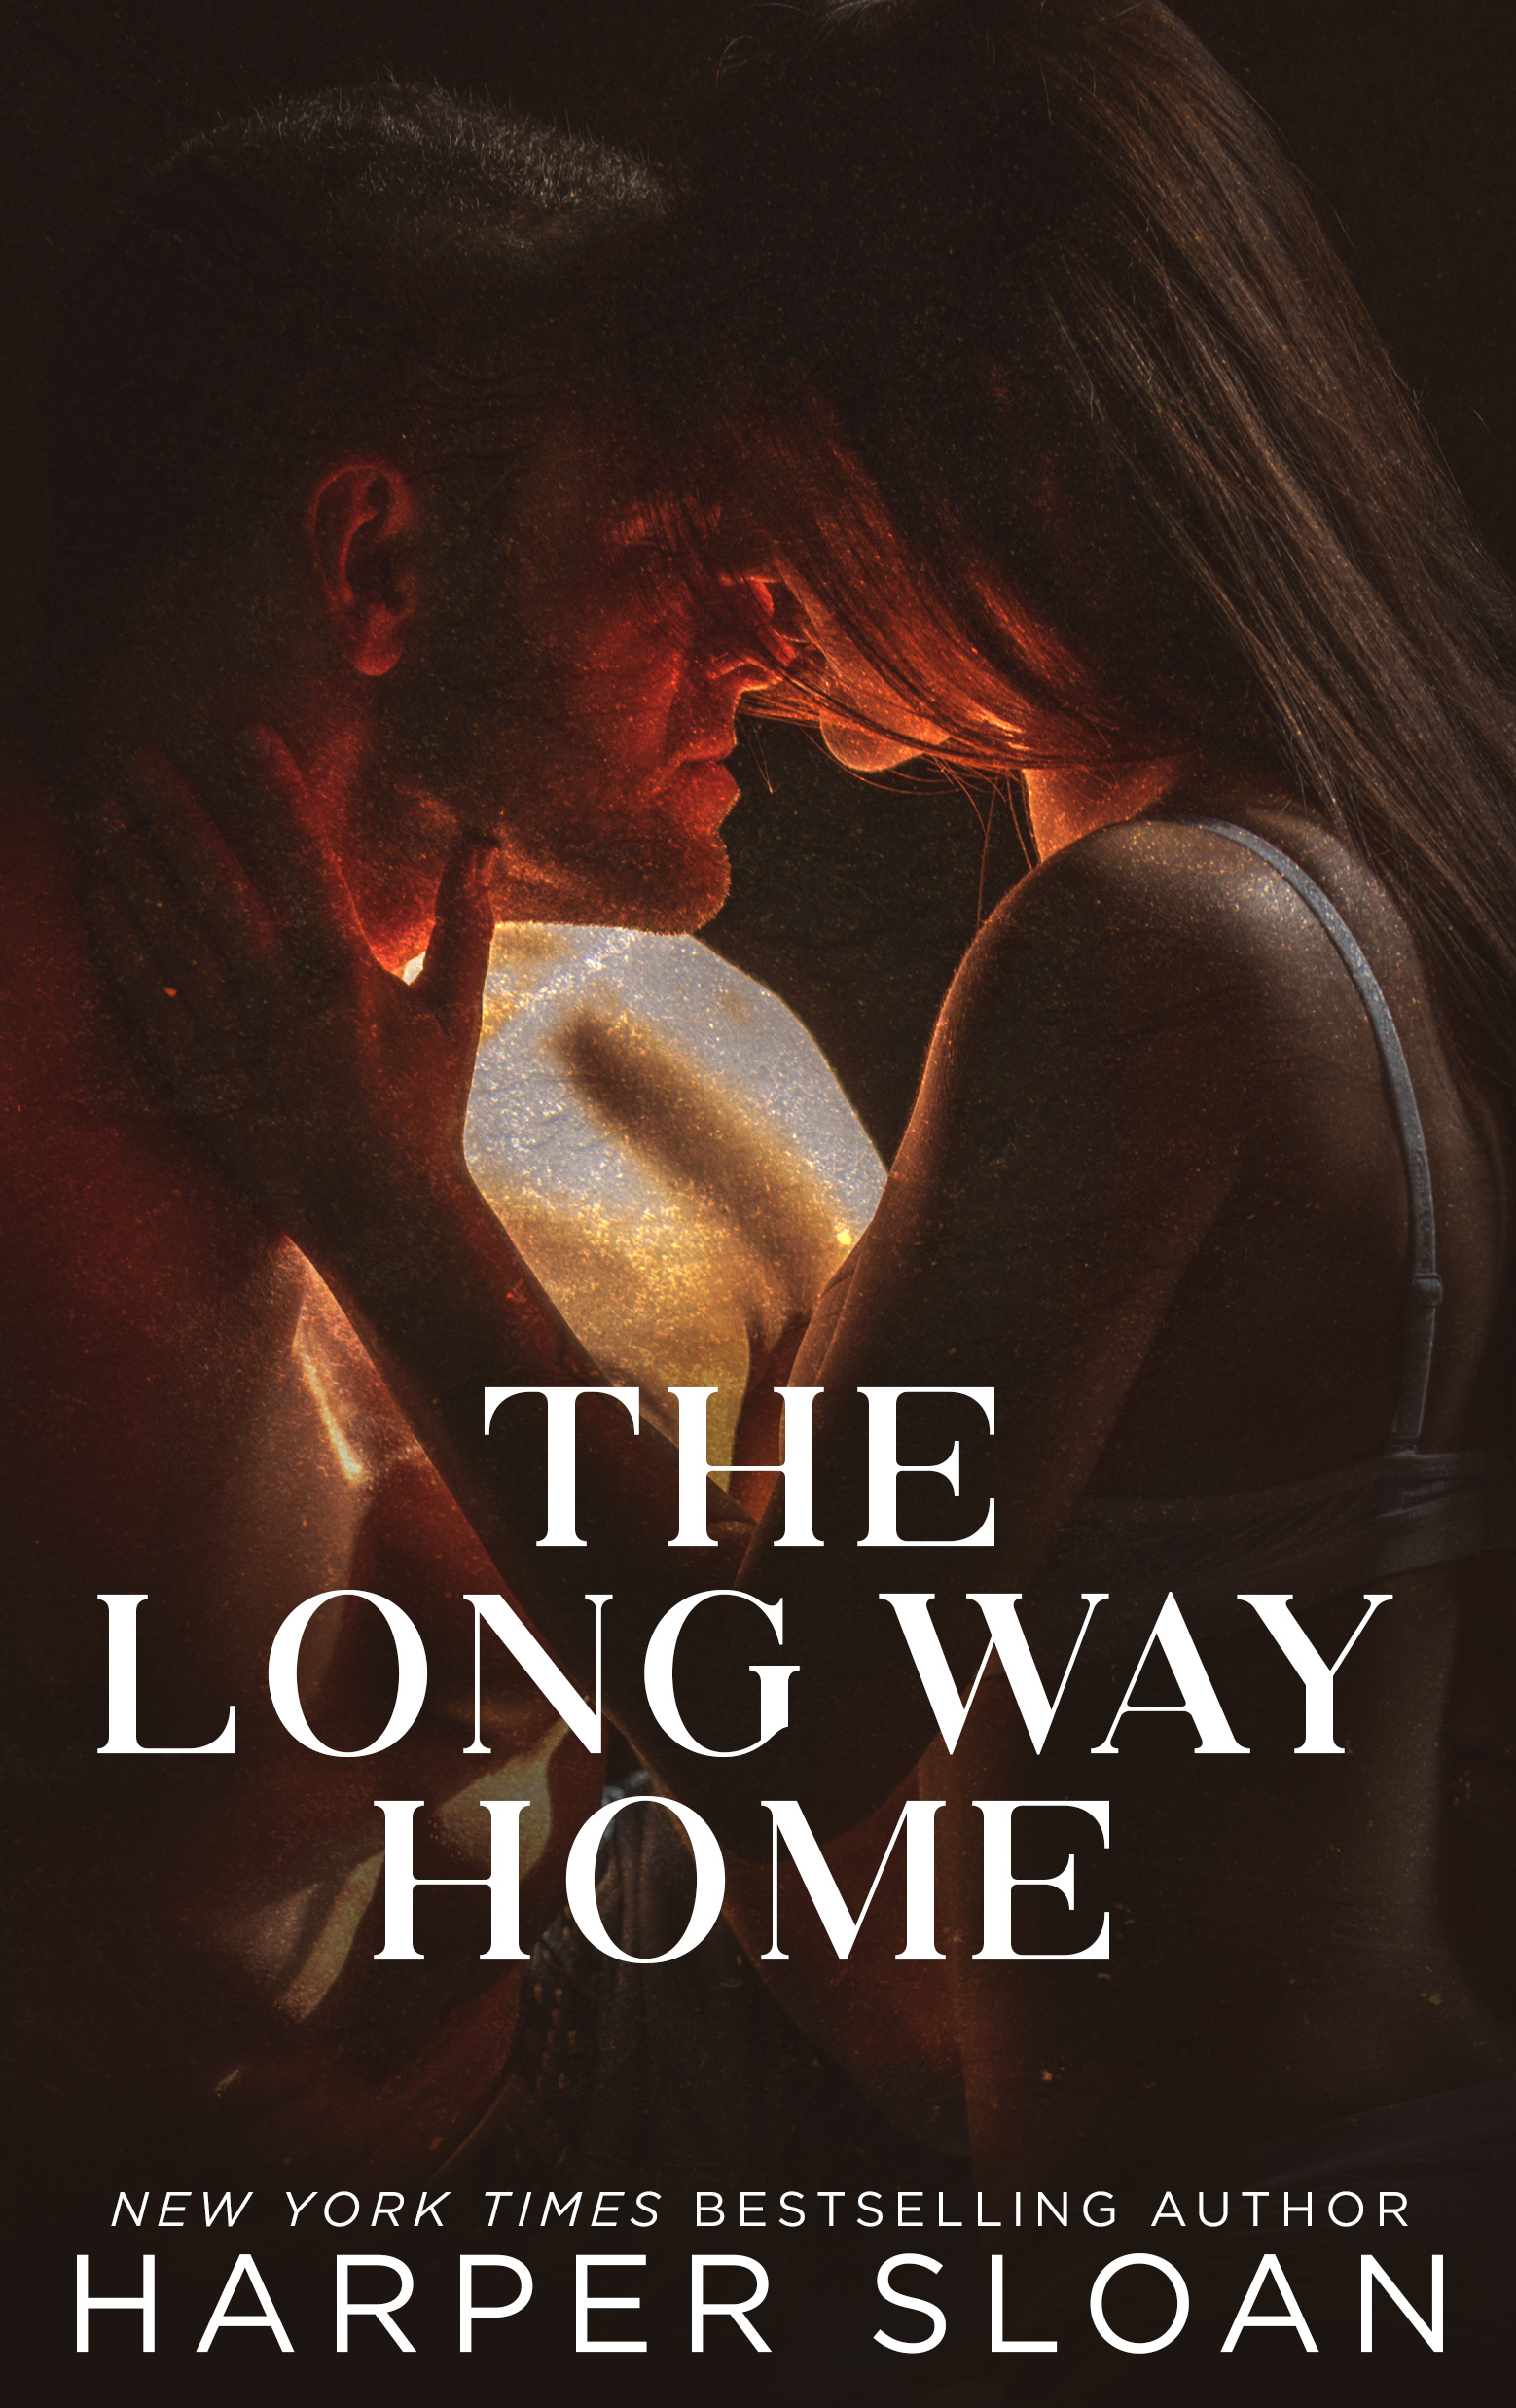 The Long Way Home by Harper Sloan PDF Download